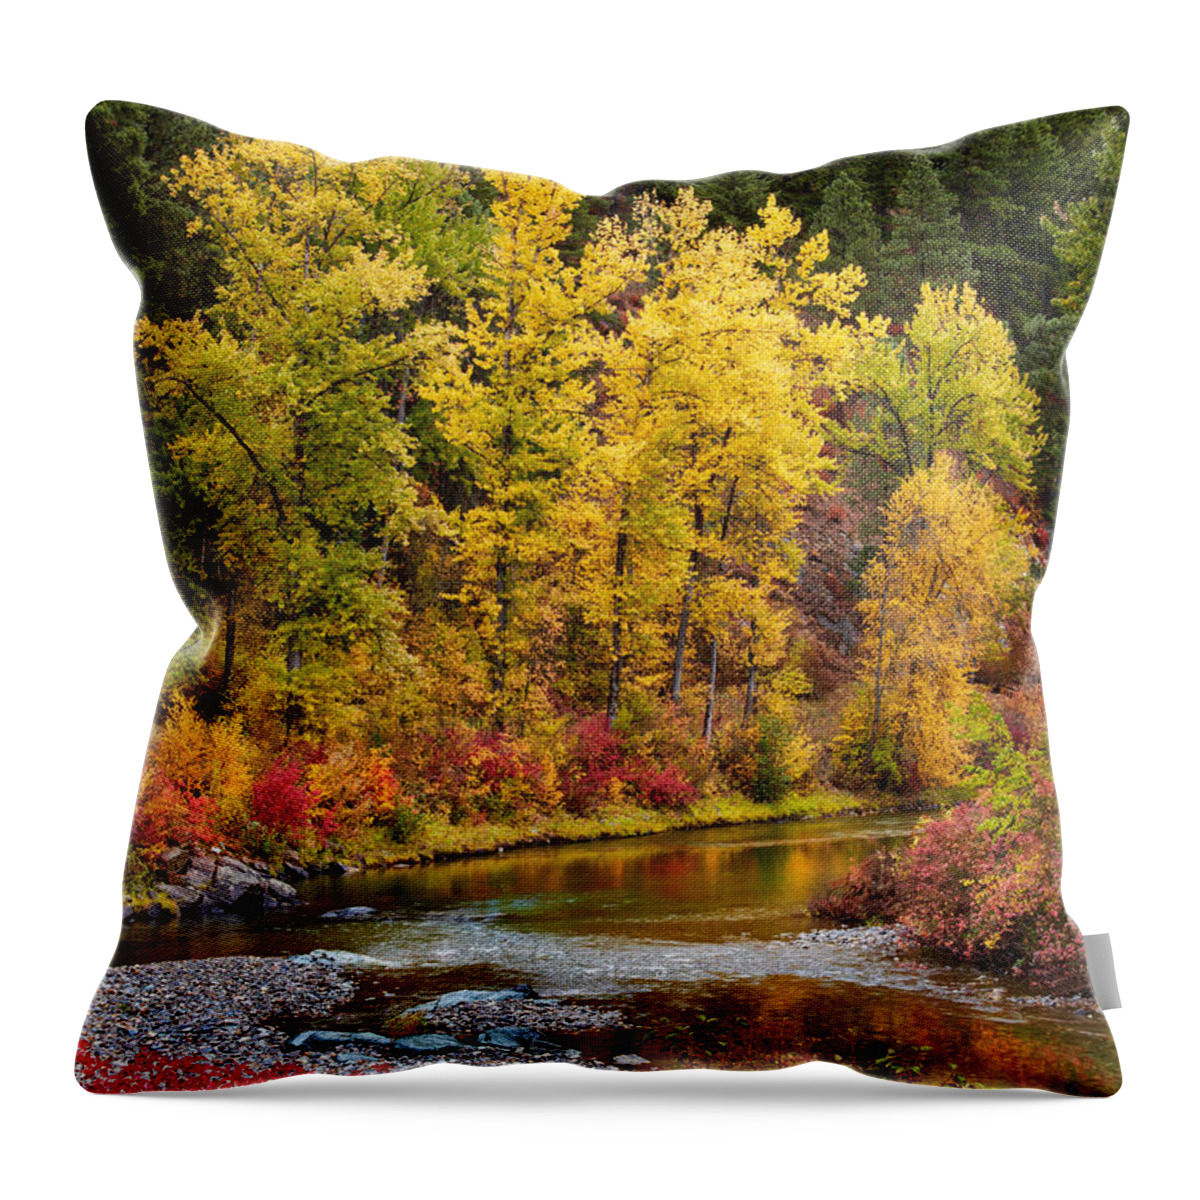 Montana Throw Pillow featuring the photograph Autumn River by Mary Jo Allen